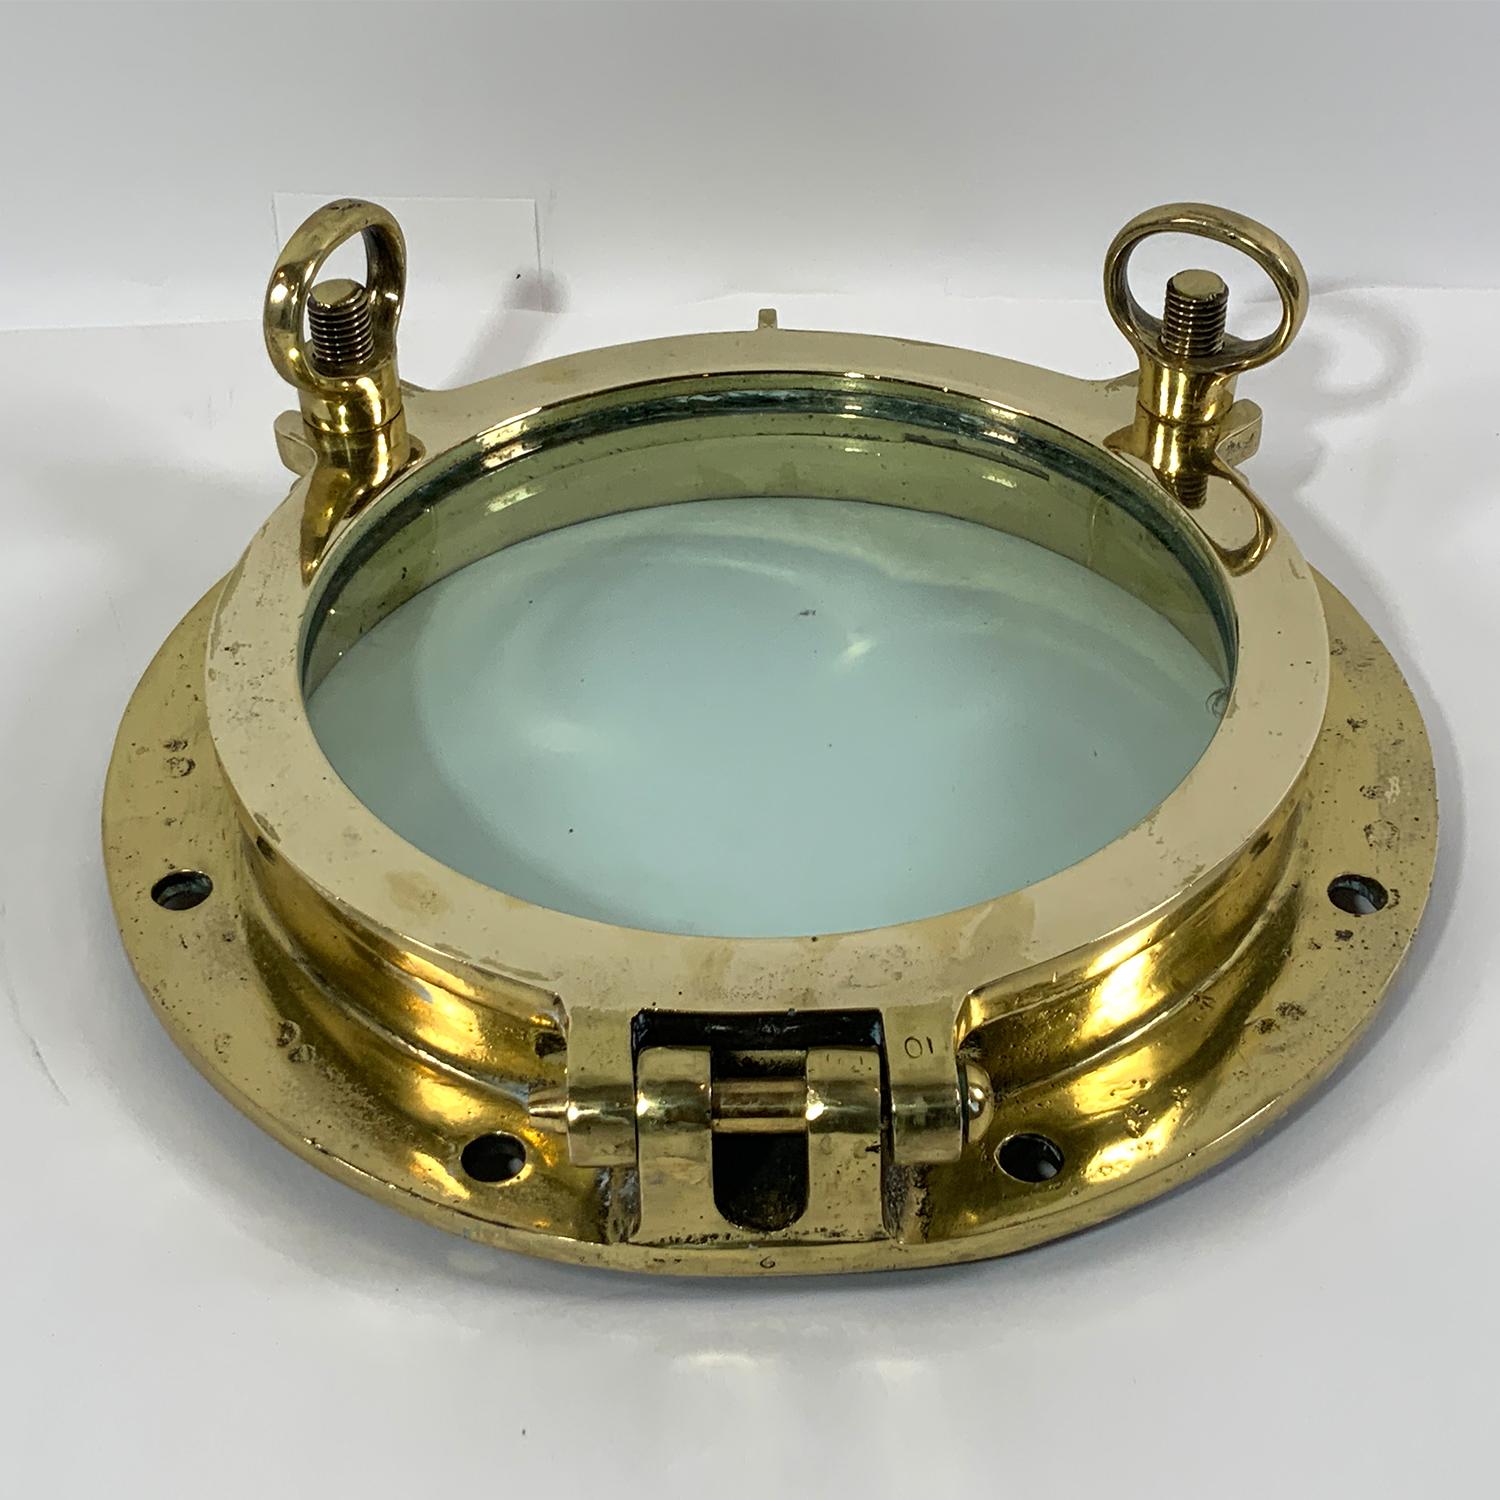 Polished and lacquered ship's porthole with hinged door and two dog bolts. Very Fine finish and clear glass. Circa 1930. Fifteen inch overall.